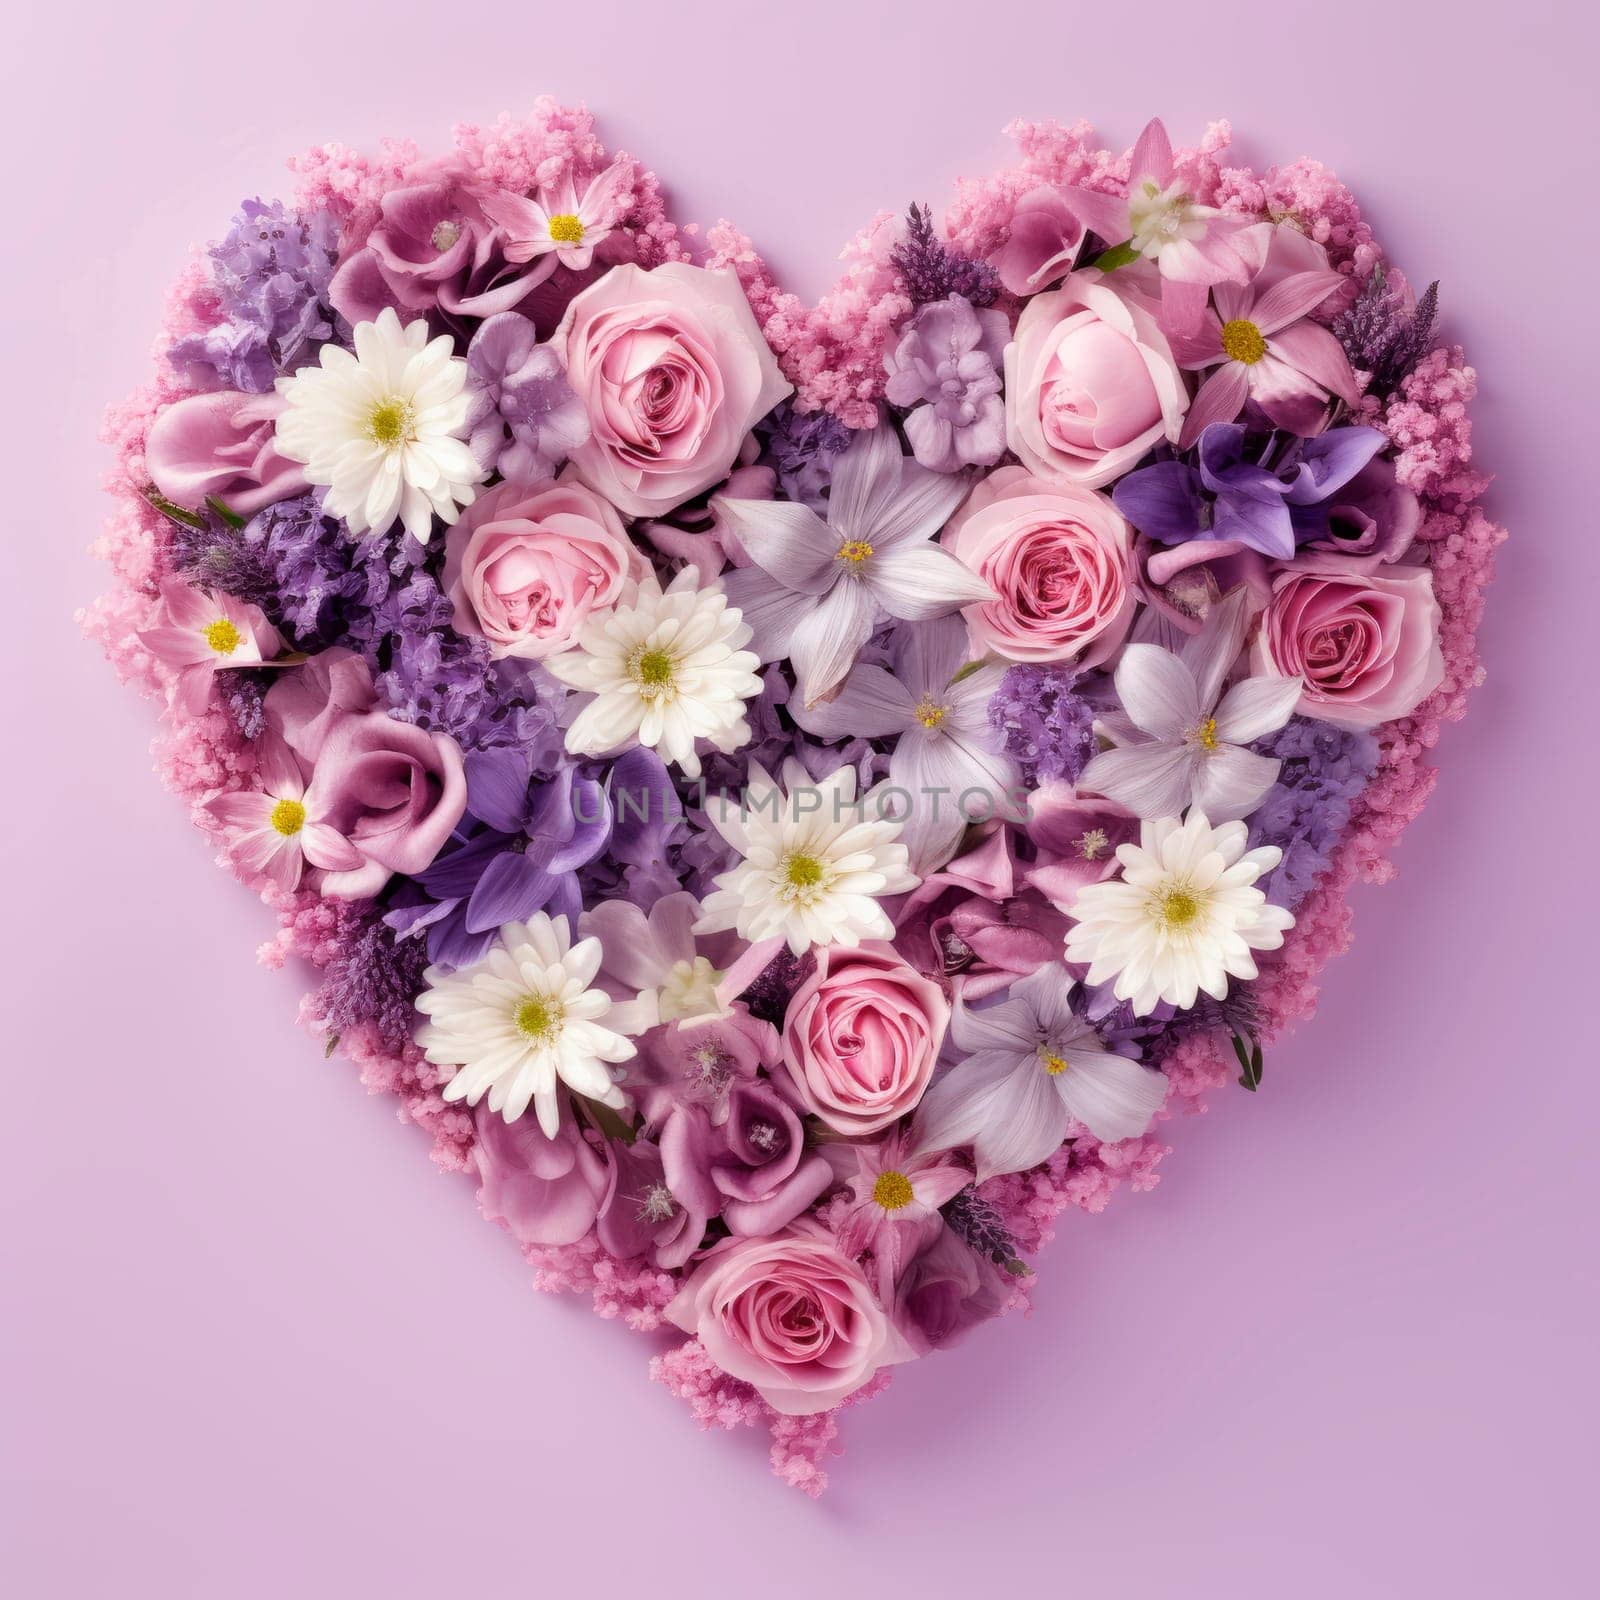 The heart is lined with beautiful multicolored flowers in pink and purple by Spirina